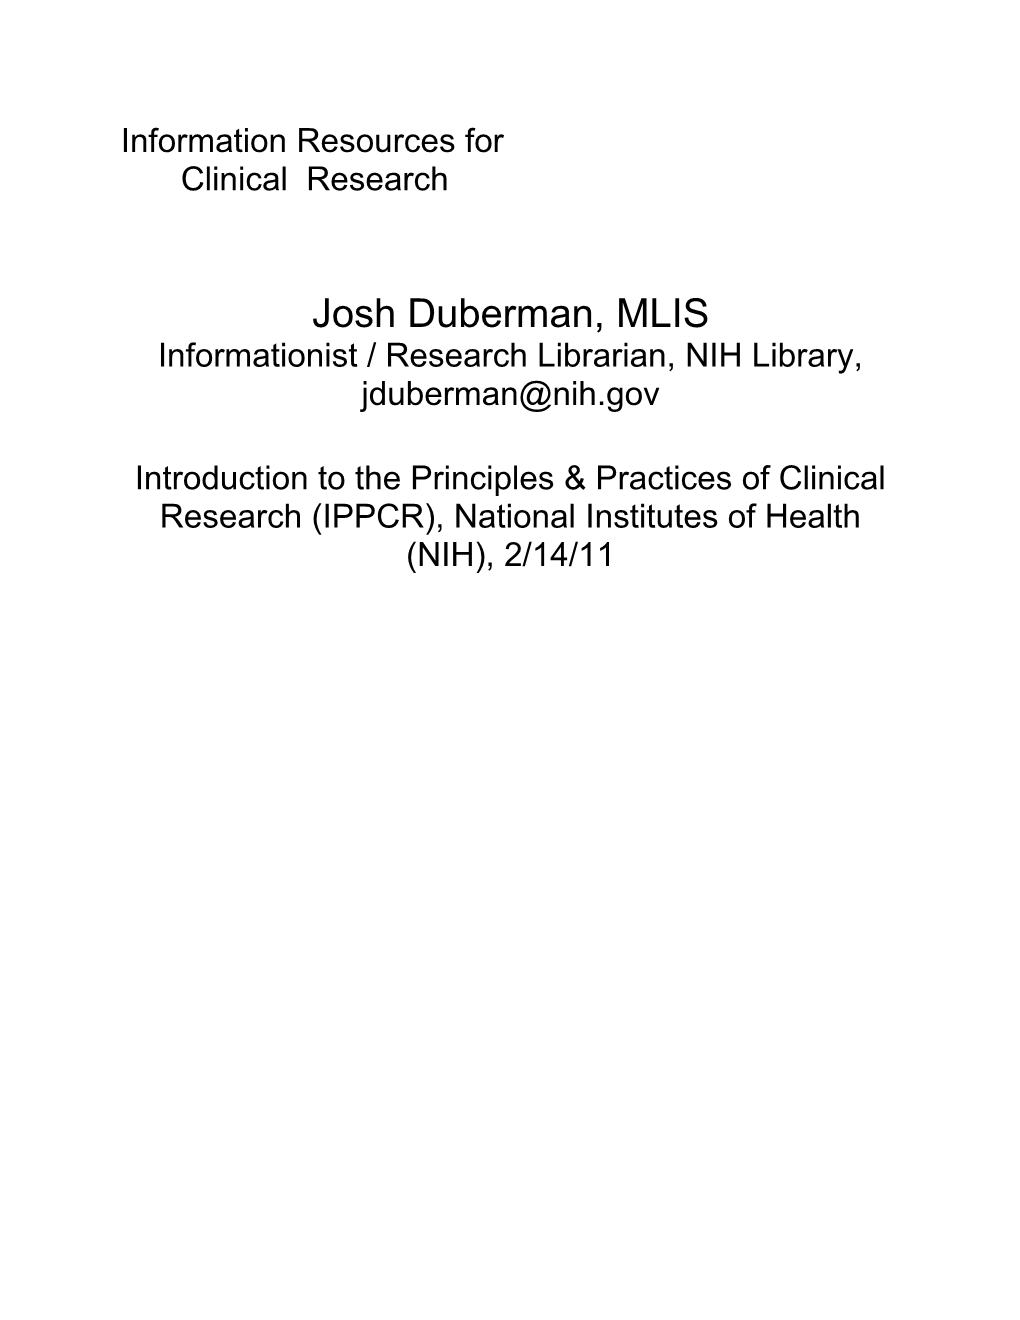 Information Resources for Clinical Research